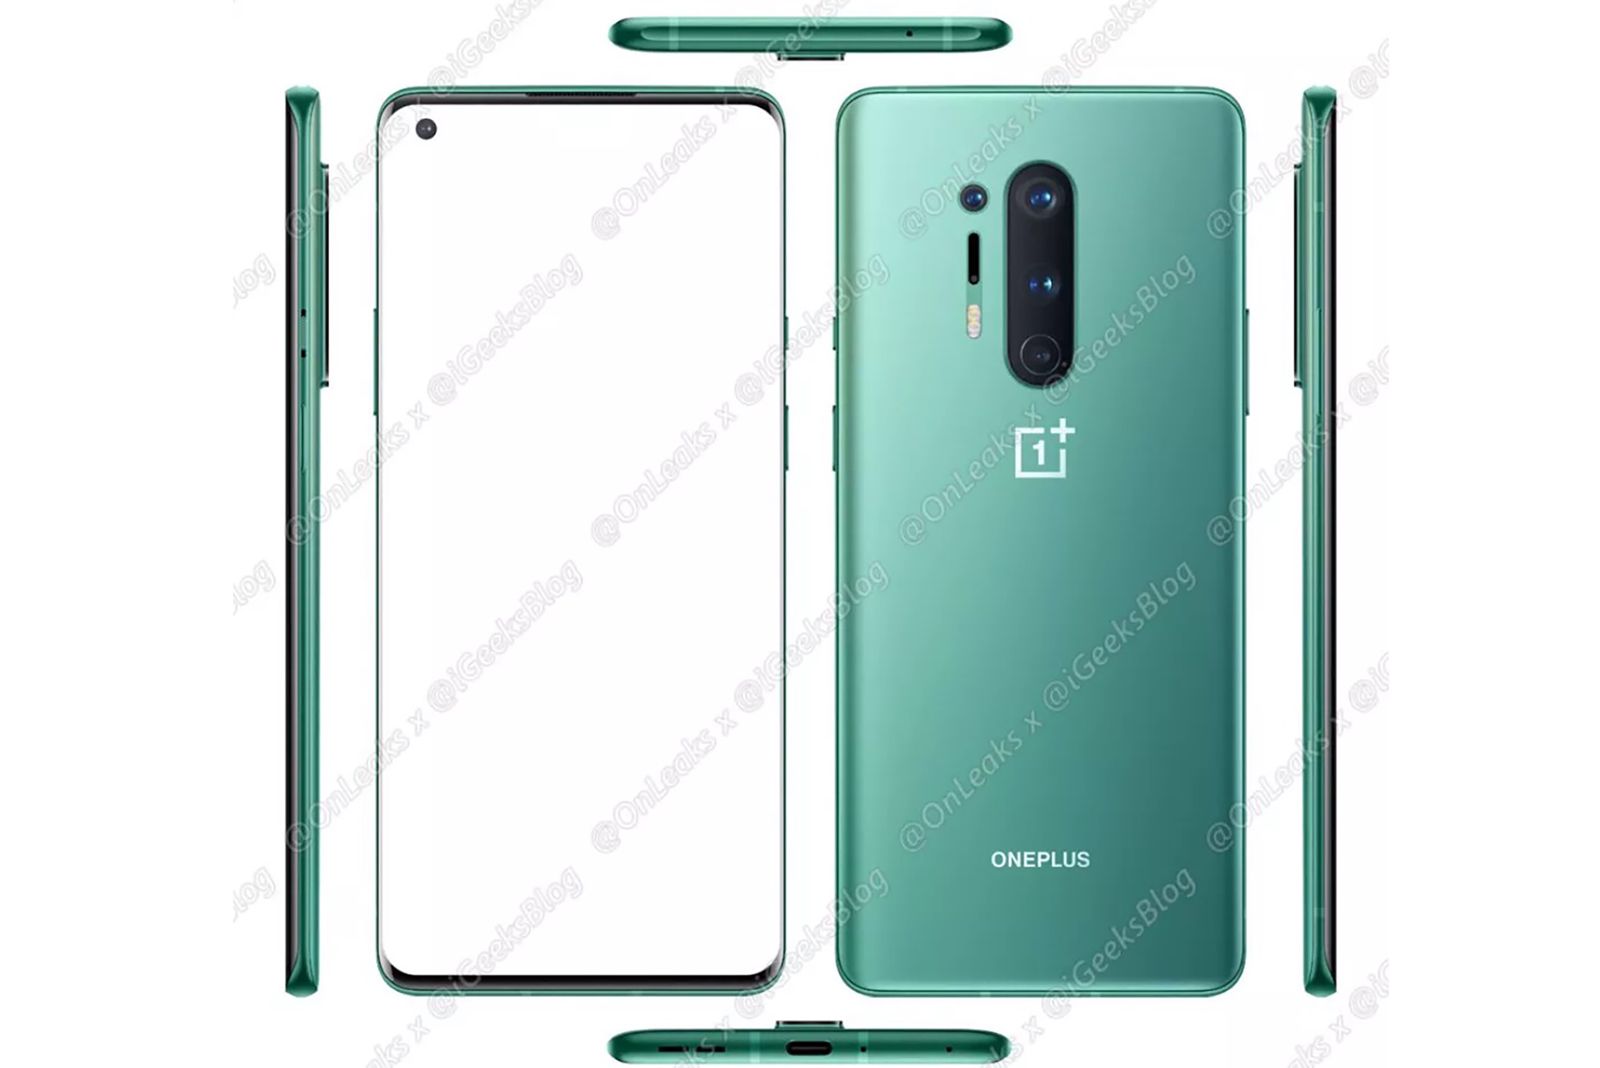 OnePlus 8 Pro might launch in a new green shade with wireless charging image 2